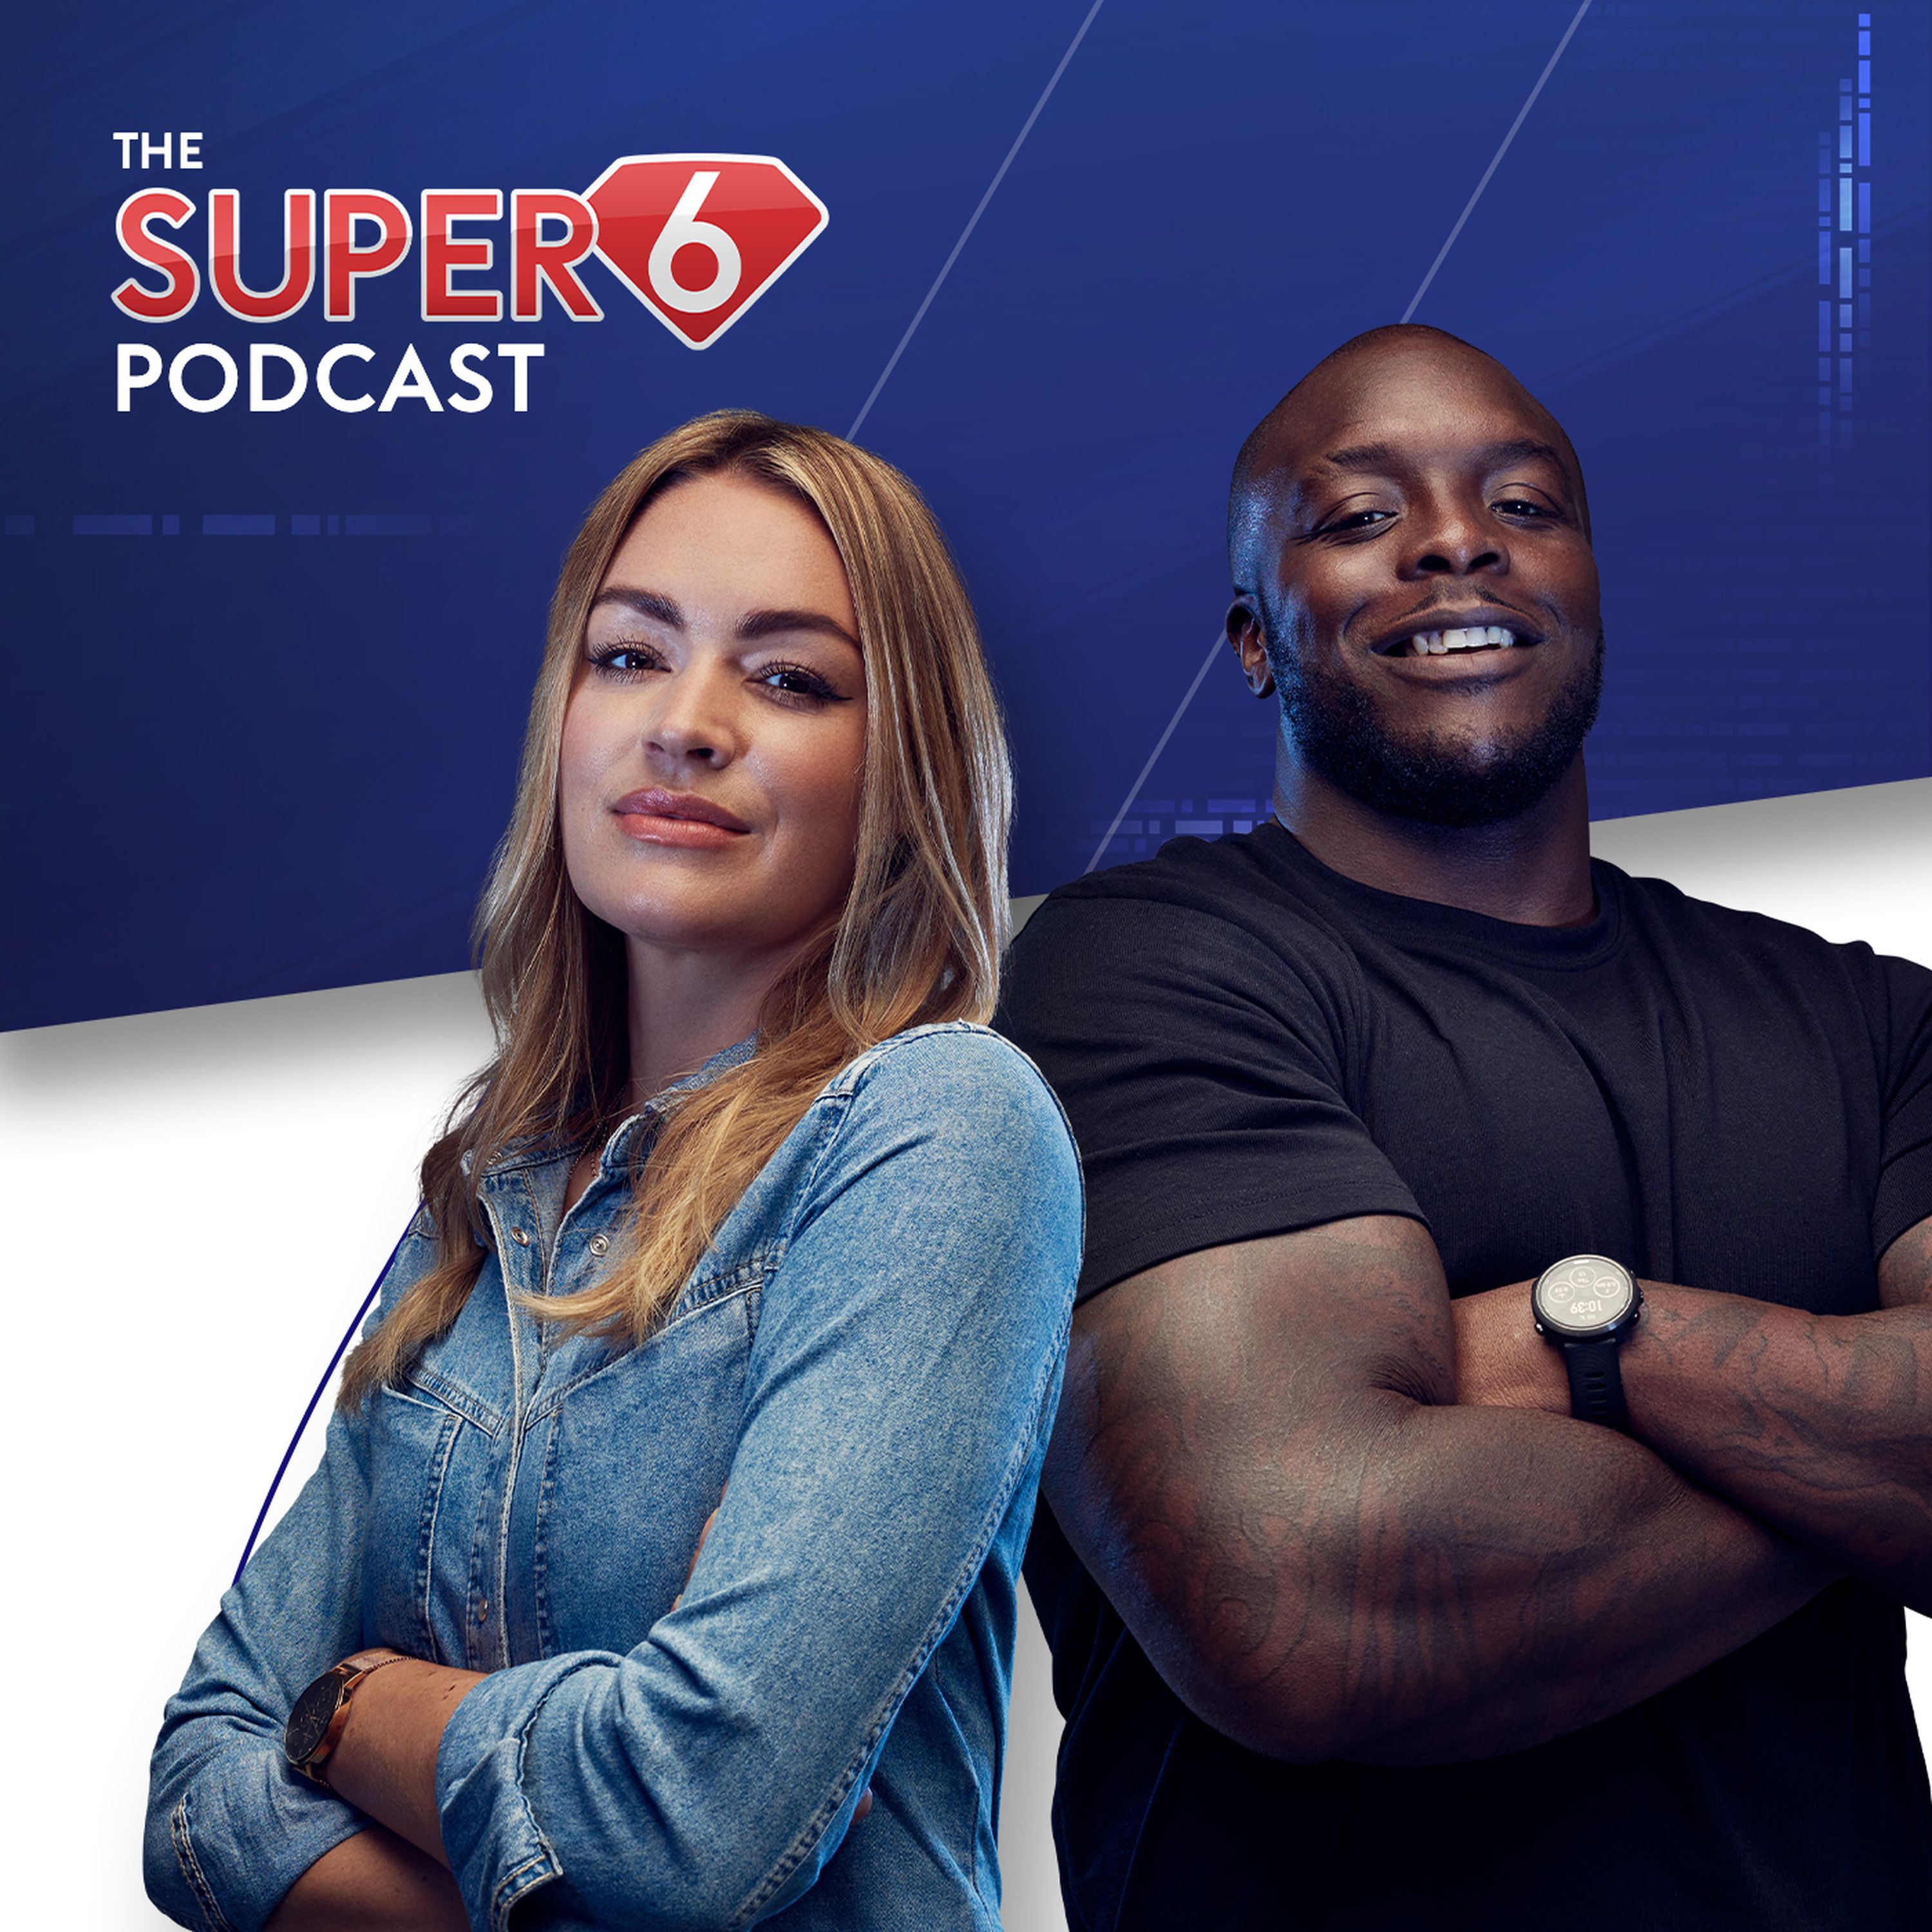 Spencer FC reveals how he made it BIG online & Hashtag United plans! | The Super 6 Podcast Episode 11